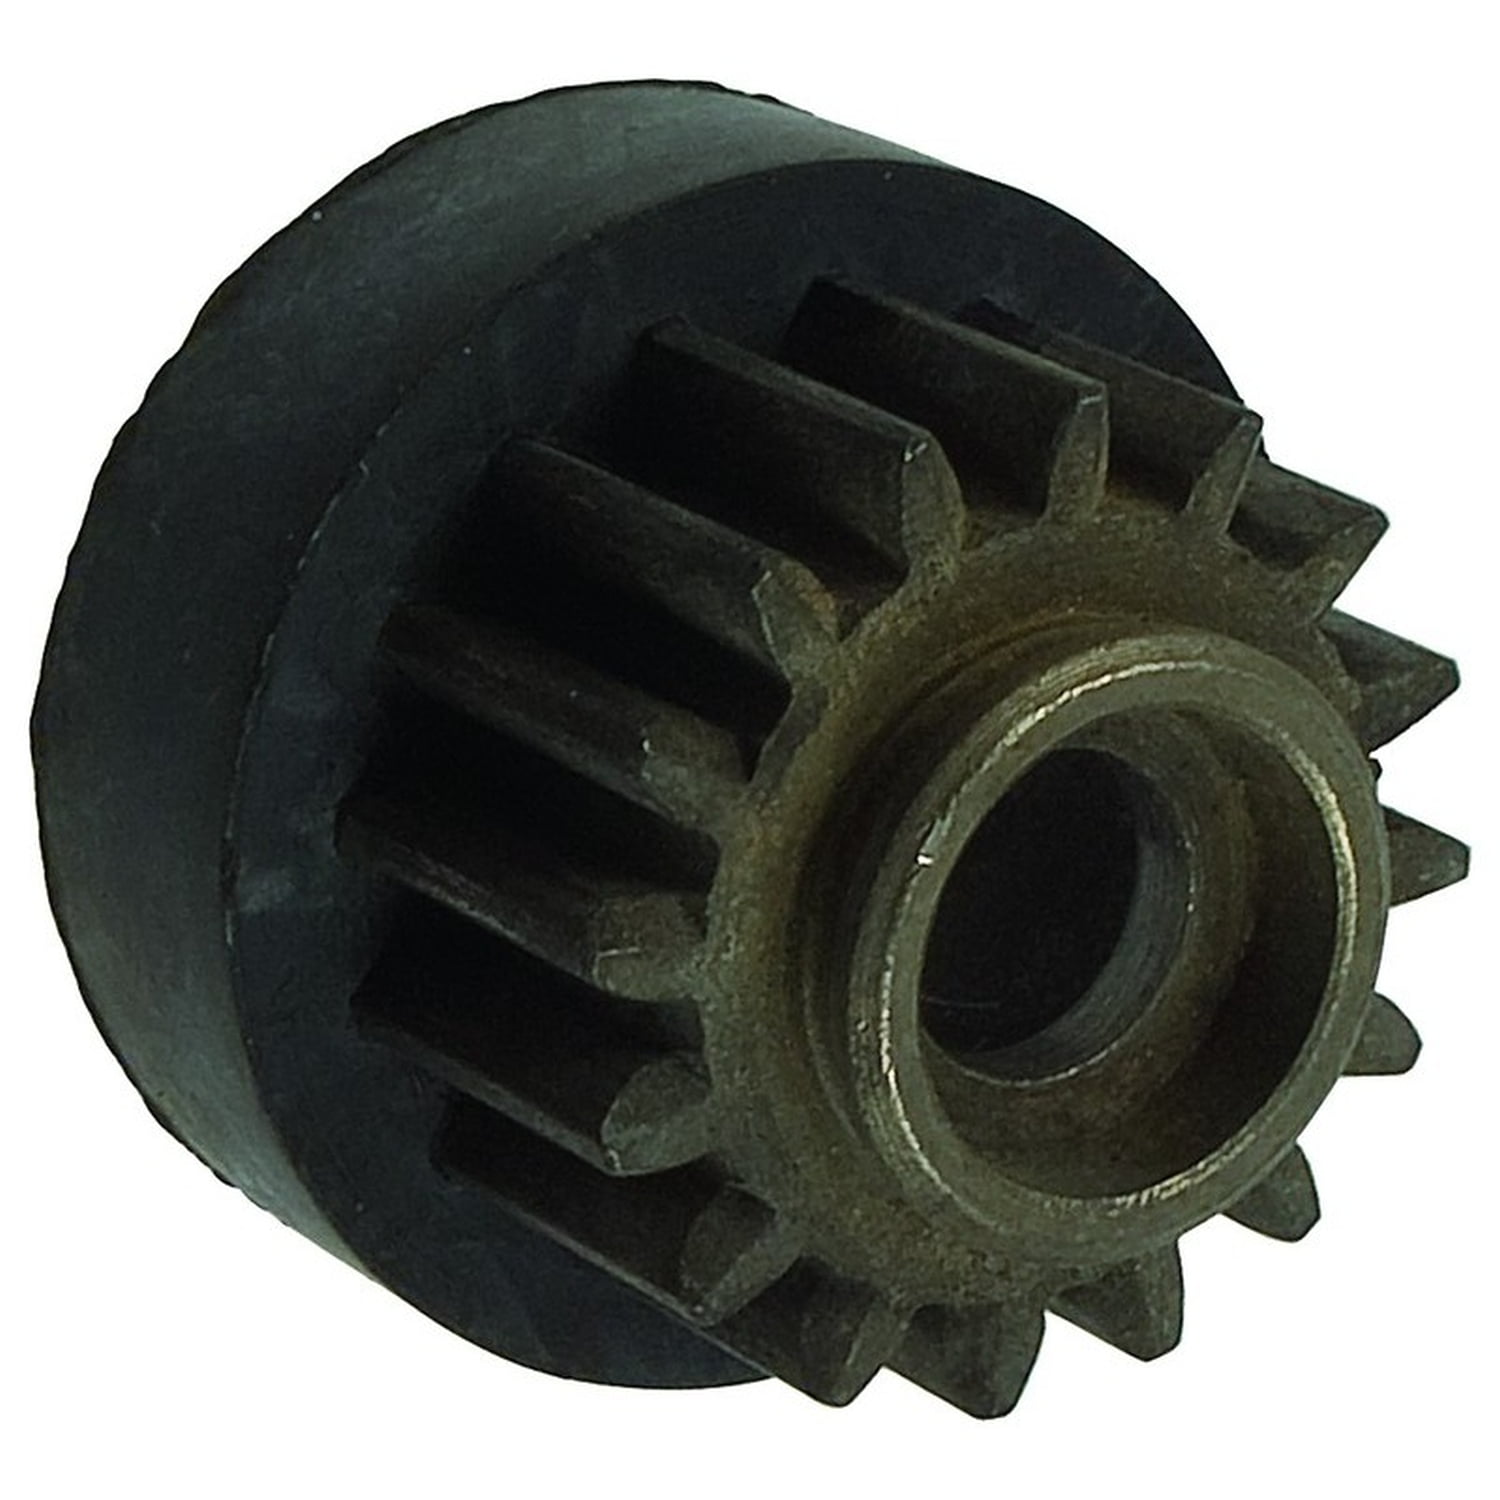 New 16 Tooth CCW Steel Gear Replacement For Tecumseh Starters Motors 33432,  37052A, 32468, 33329, 33329A, 33329B, 33329C, 33329D, 33329E, 33329F,  33605, 33606, 35763, 35765, 37000